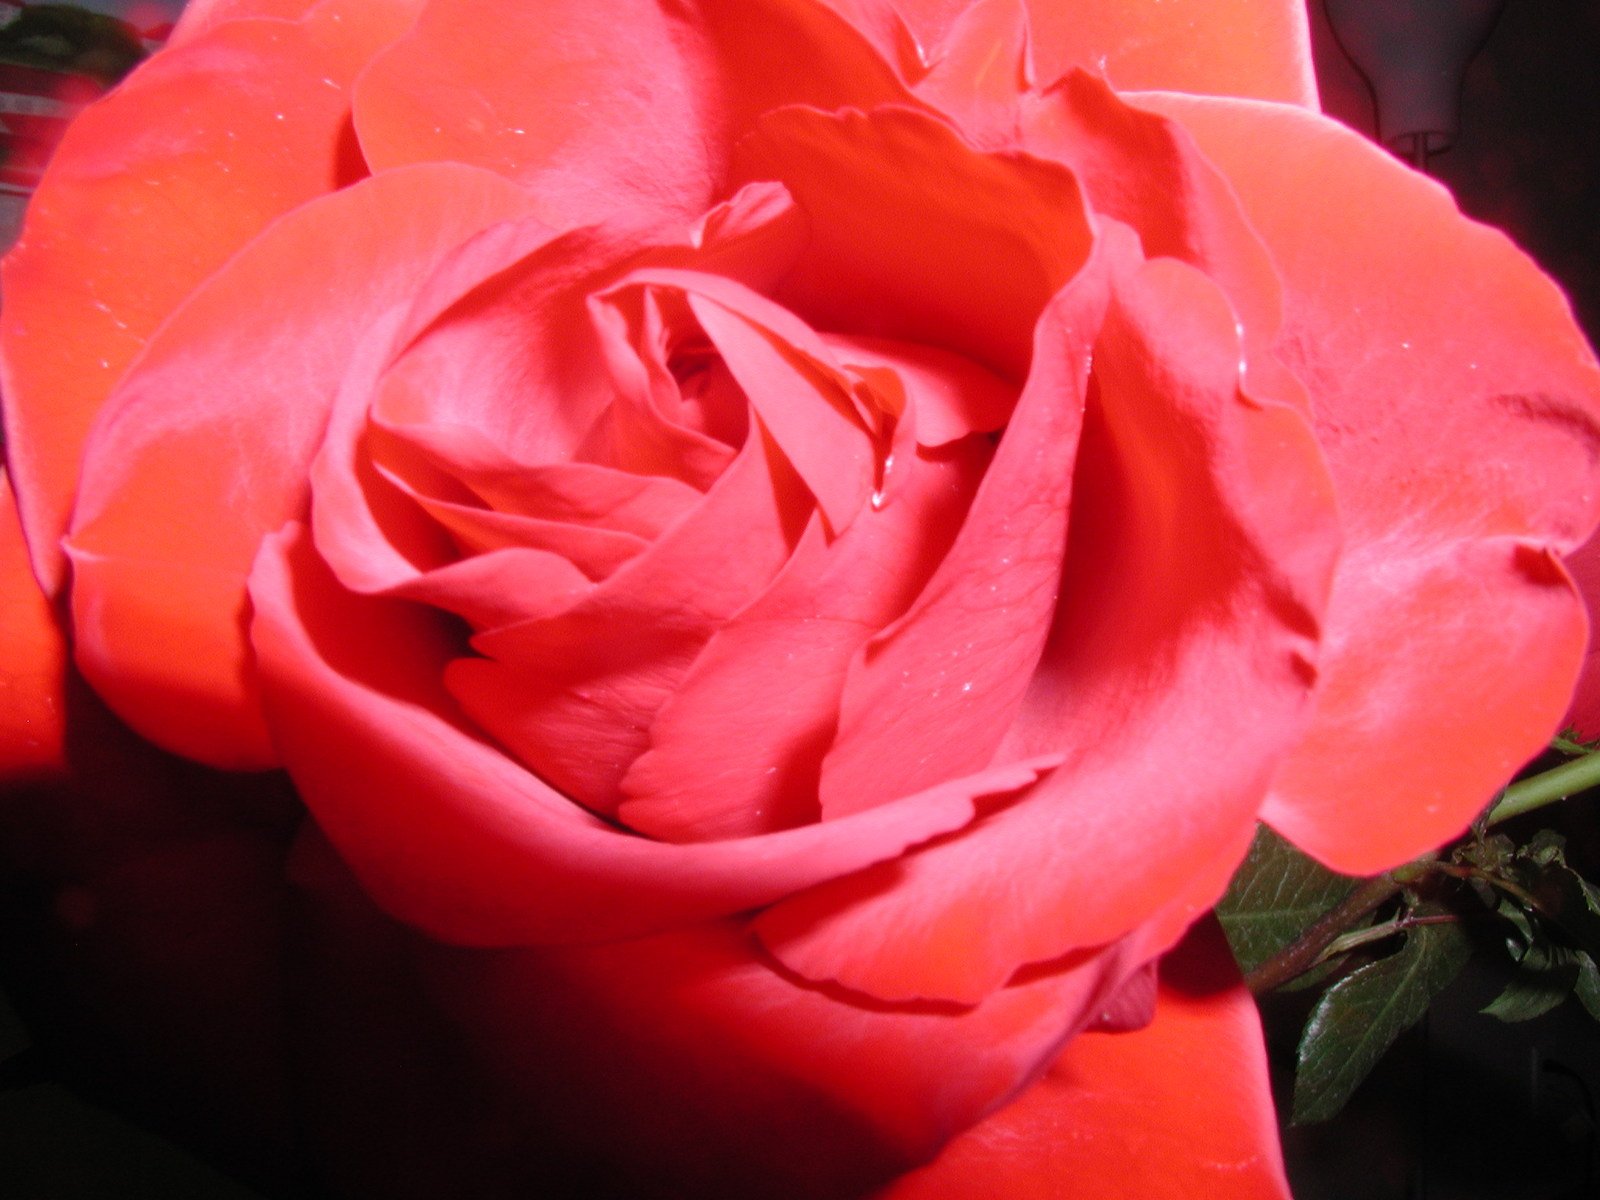 a close up image of a large rose